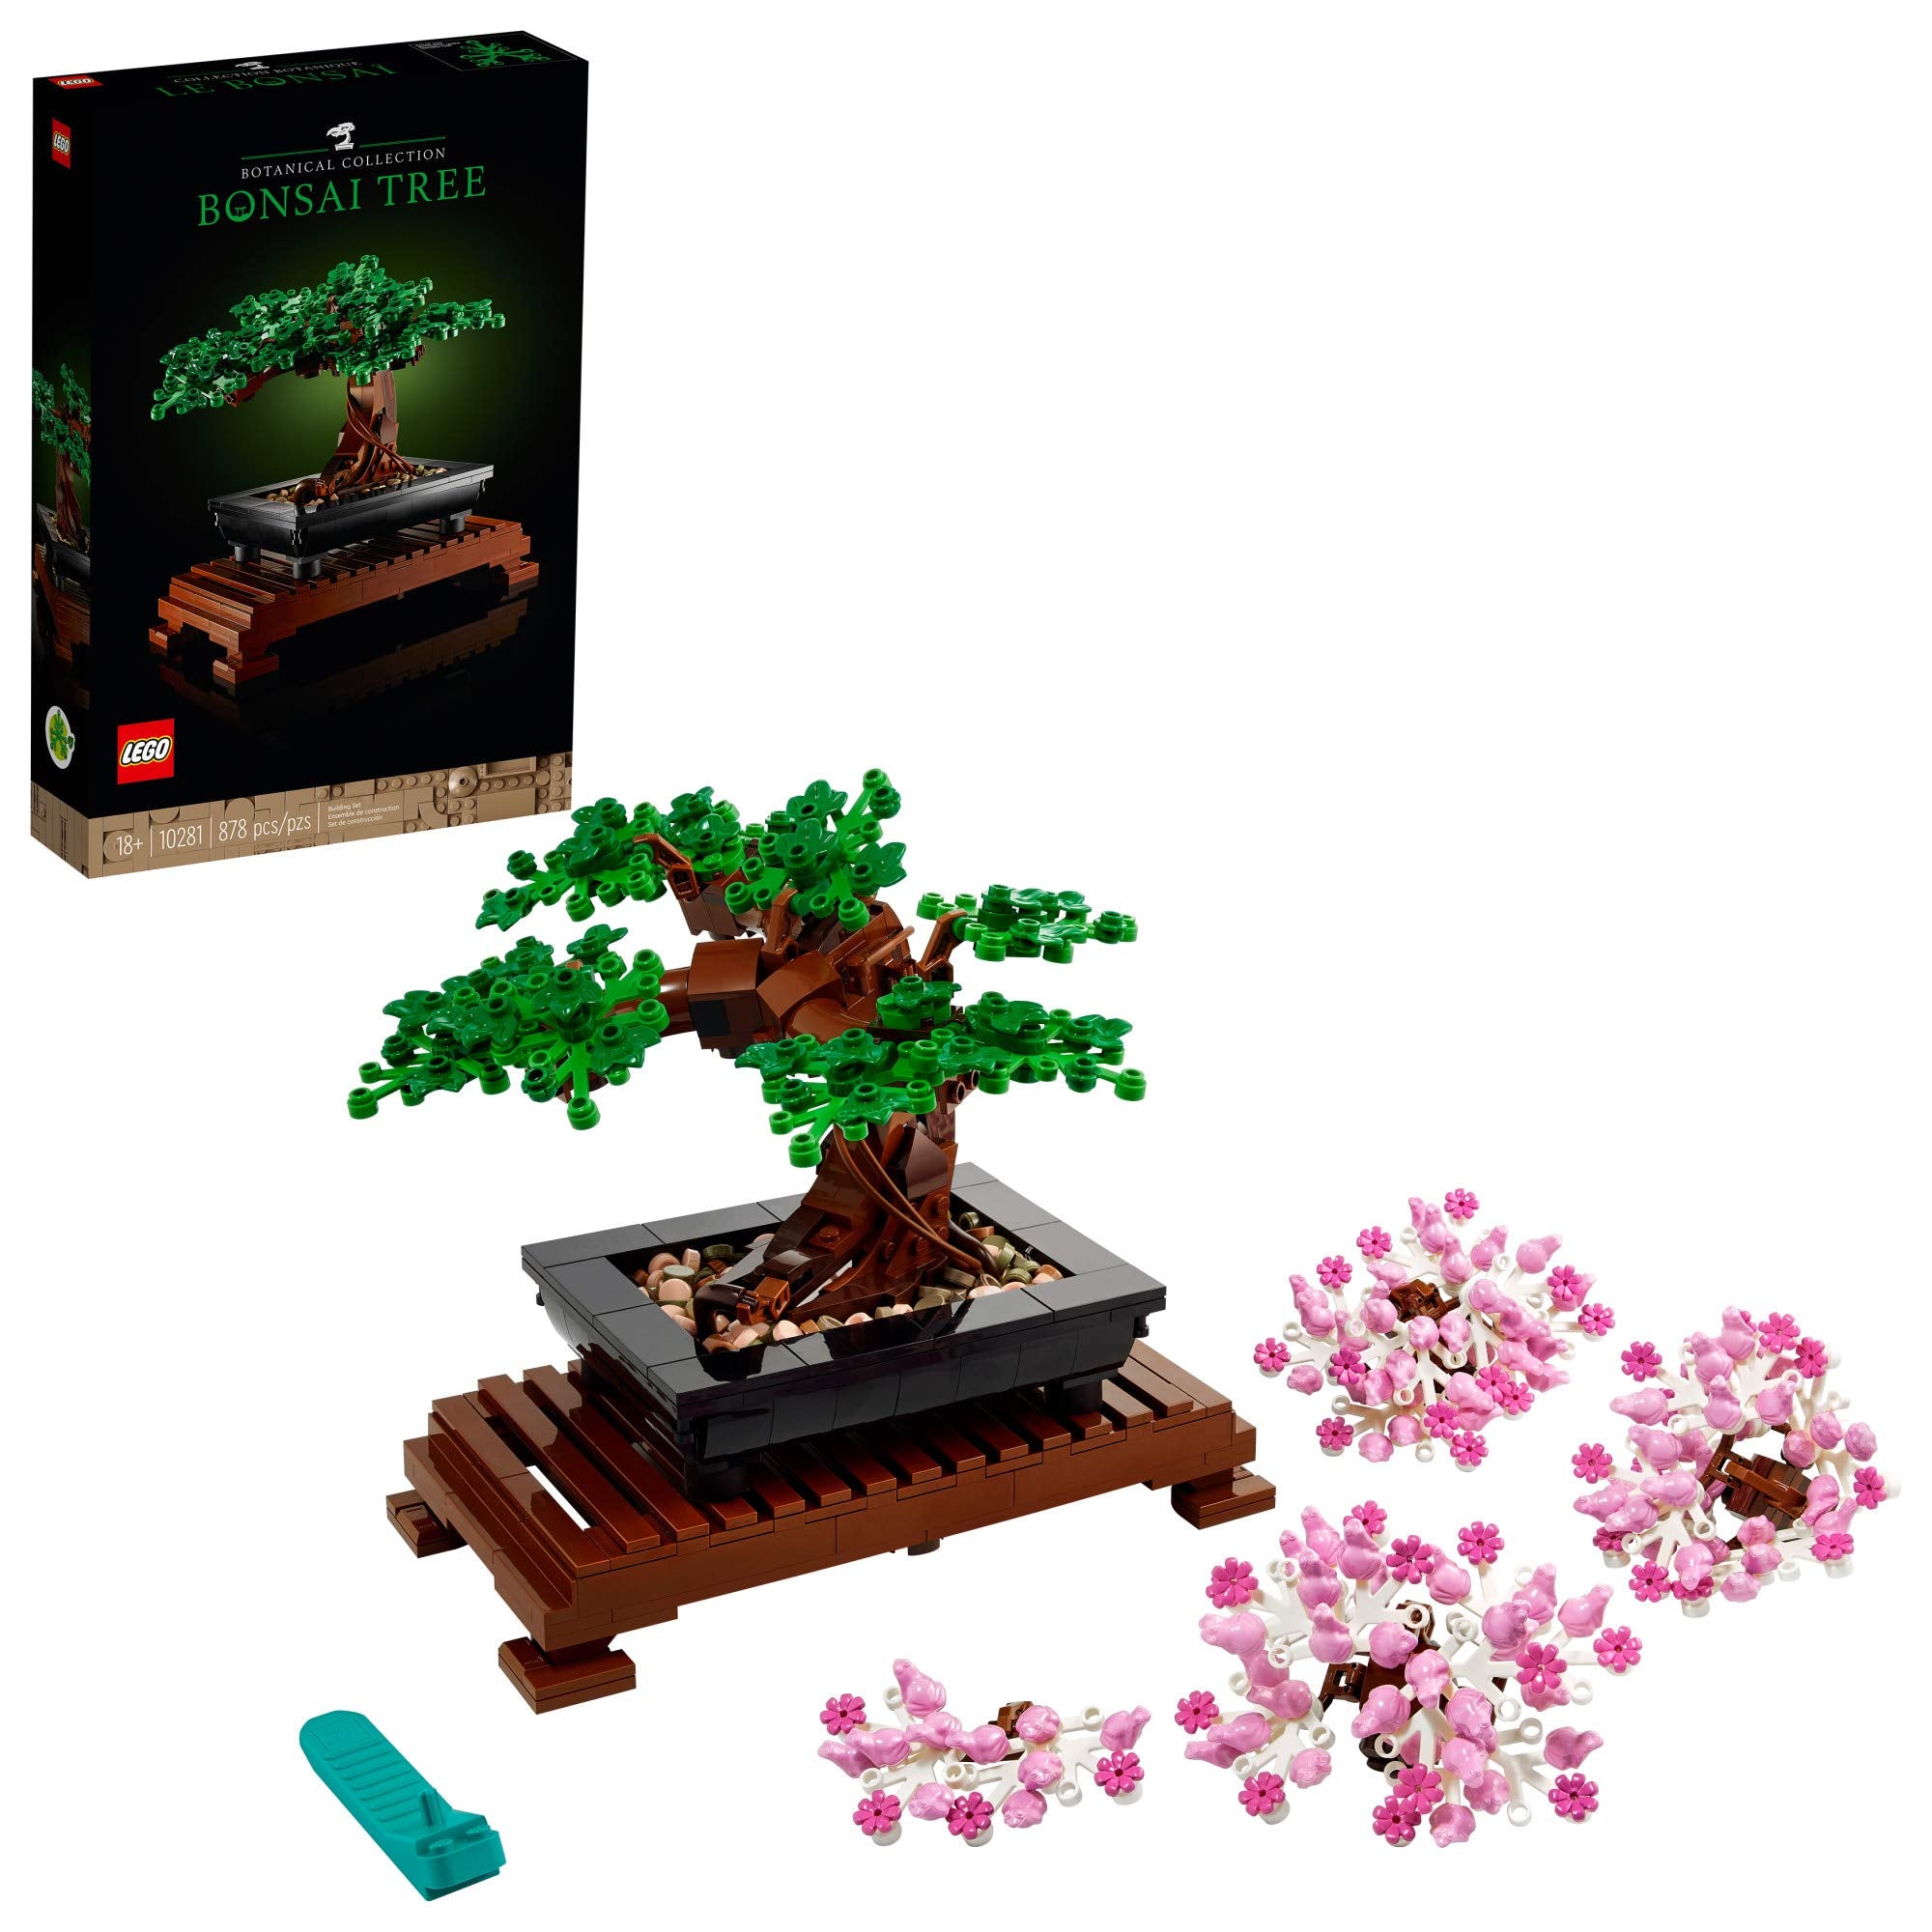 LEGO Bonsai Tree 10281 Building Kit, a Building Project to Focus The Mind with a Beautiful Display Piece to Enjoy (878 Pieces) (Like New, Open Box)